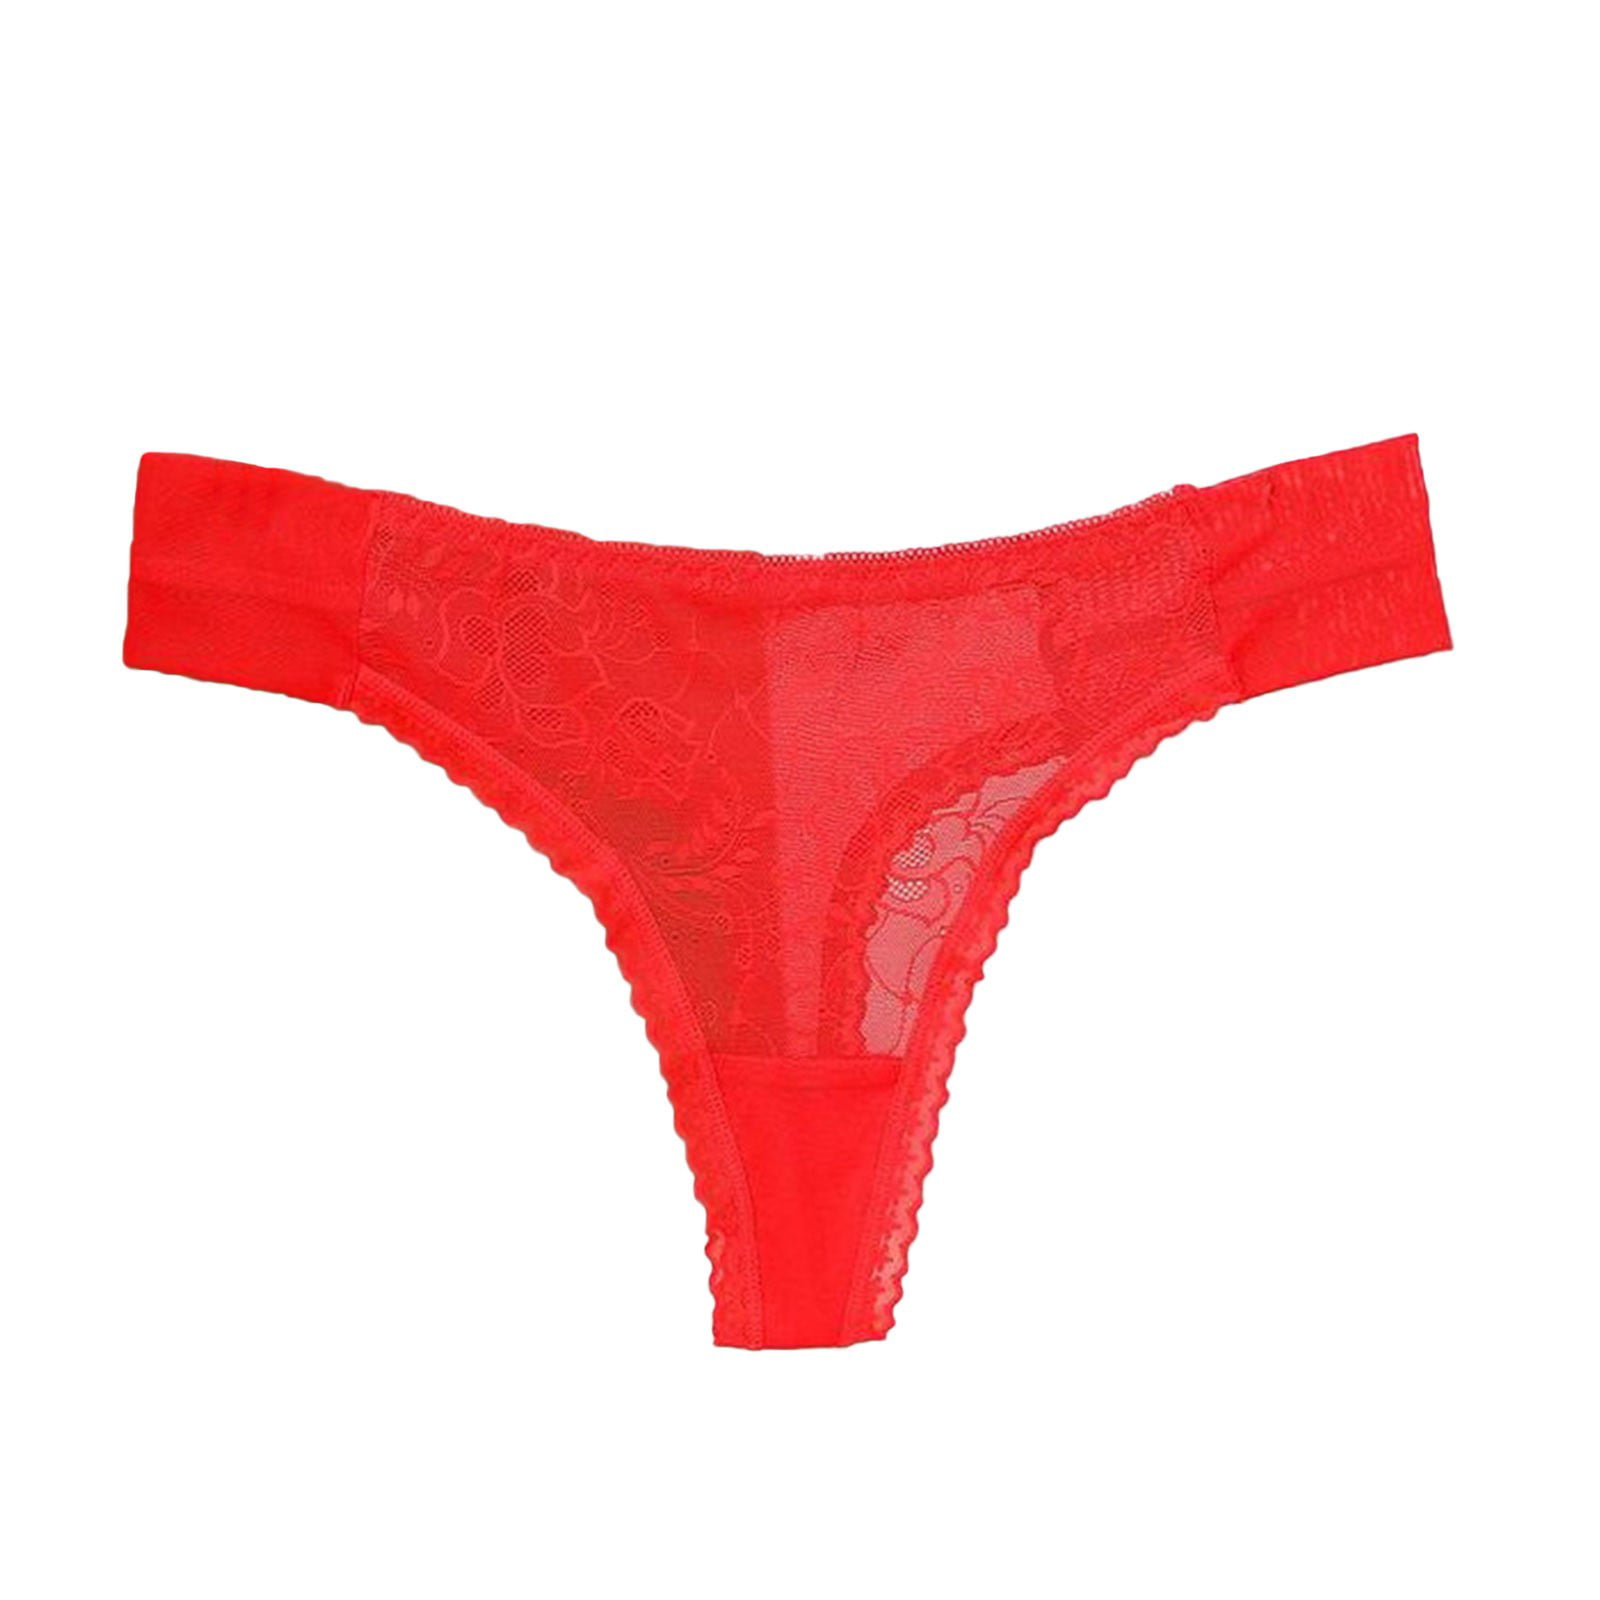 LBECLEY Ladies Underwear Cotton Boy Shorts Women Lace Breathable Hollow  Thong Low Waist Girls Panties New Years Eve T Shirt Girls Red S 